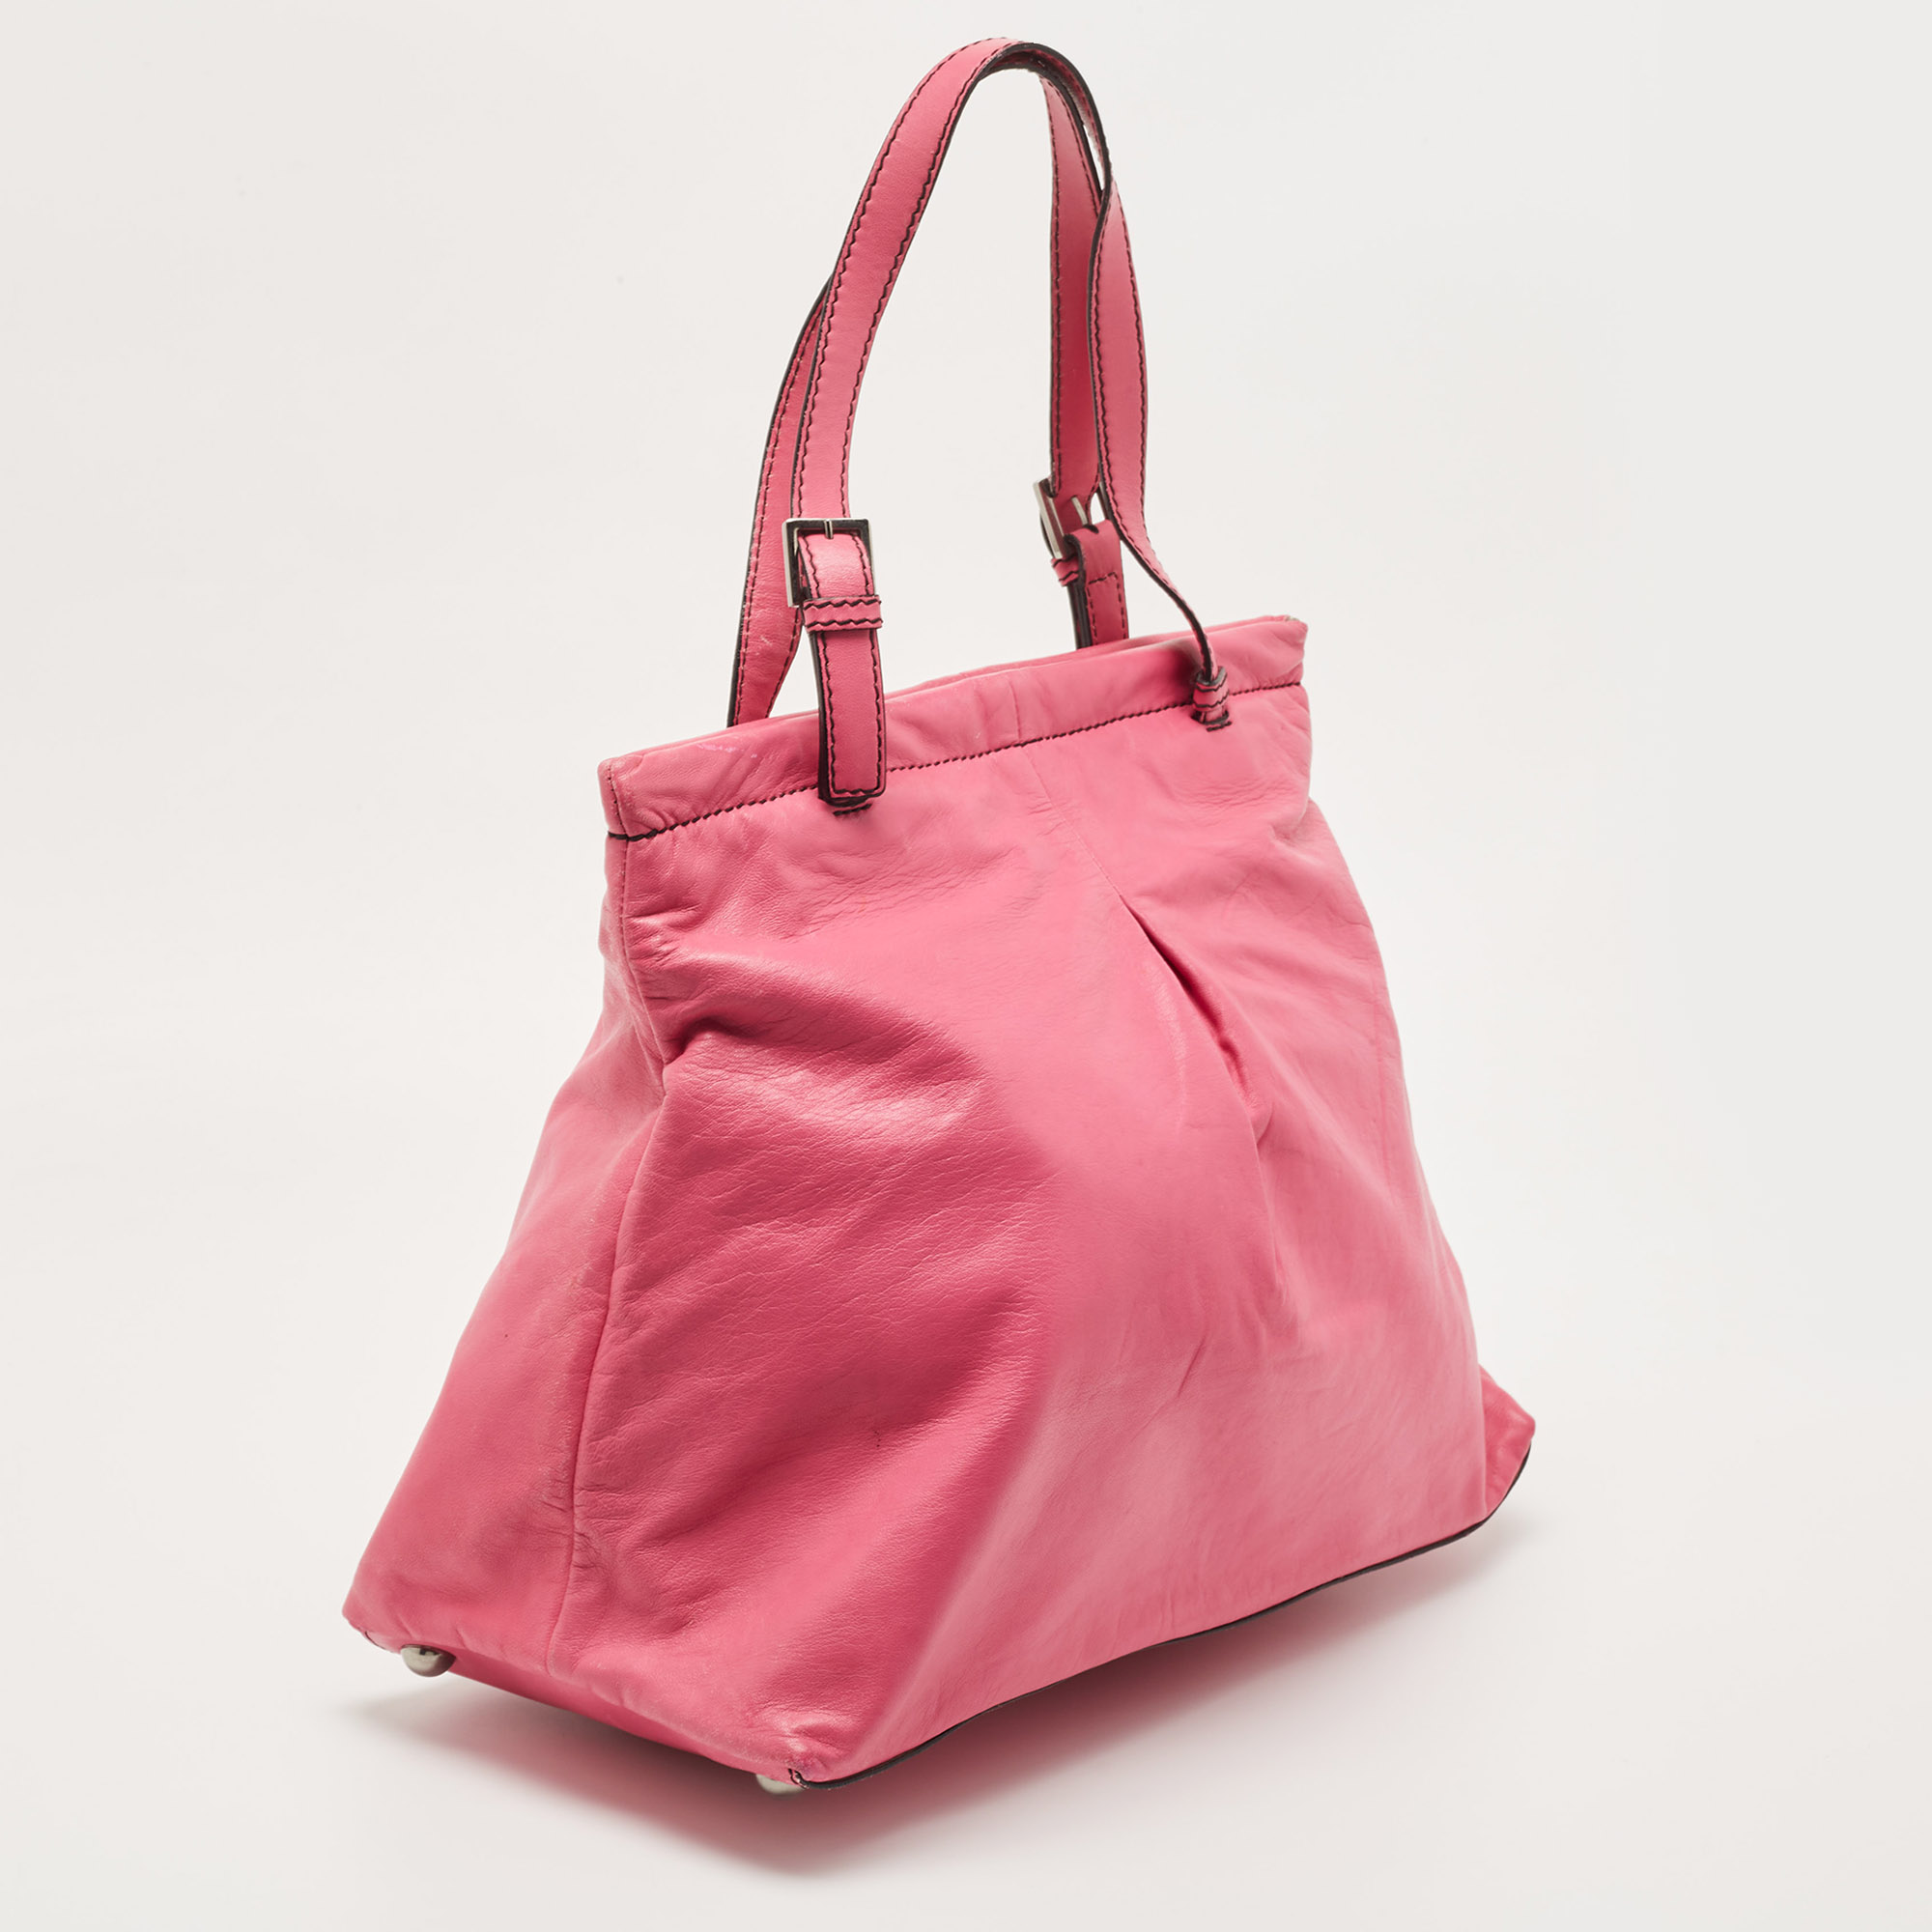 Valentino Pink Leather Tote